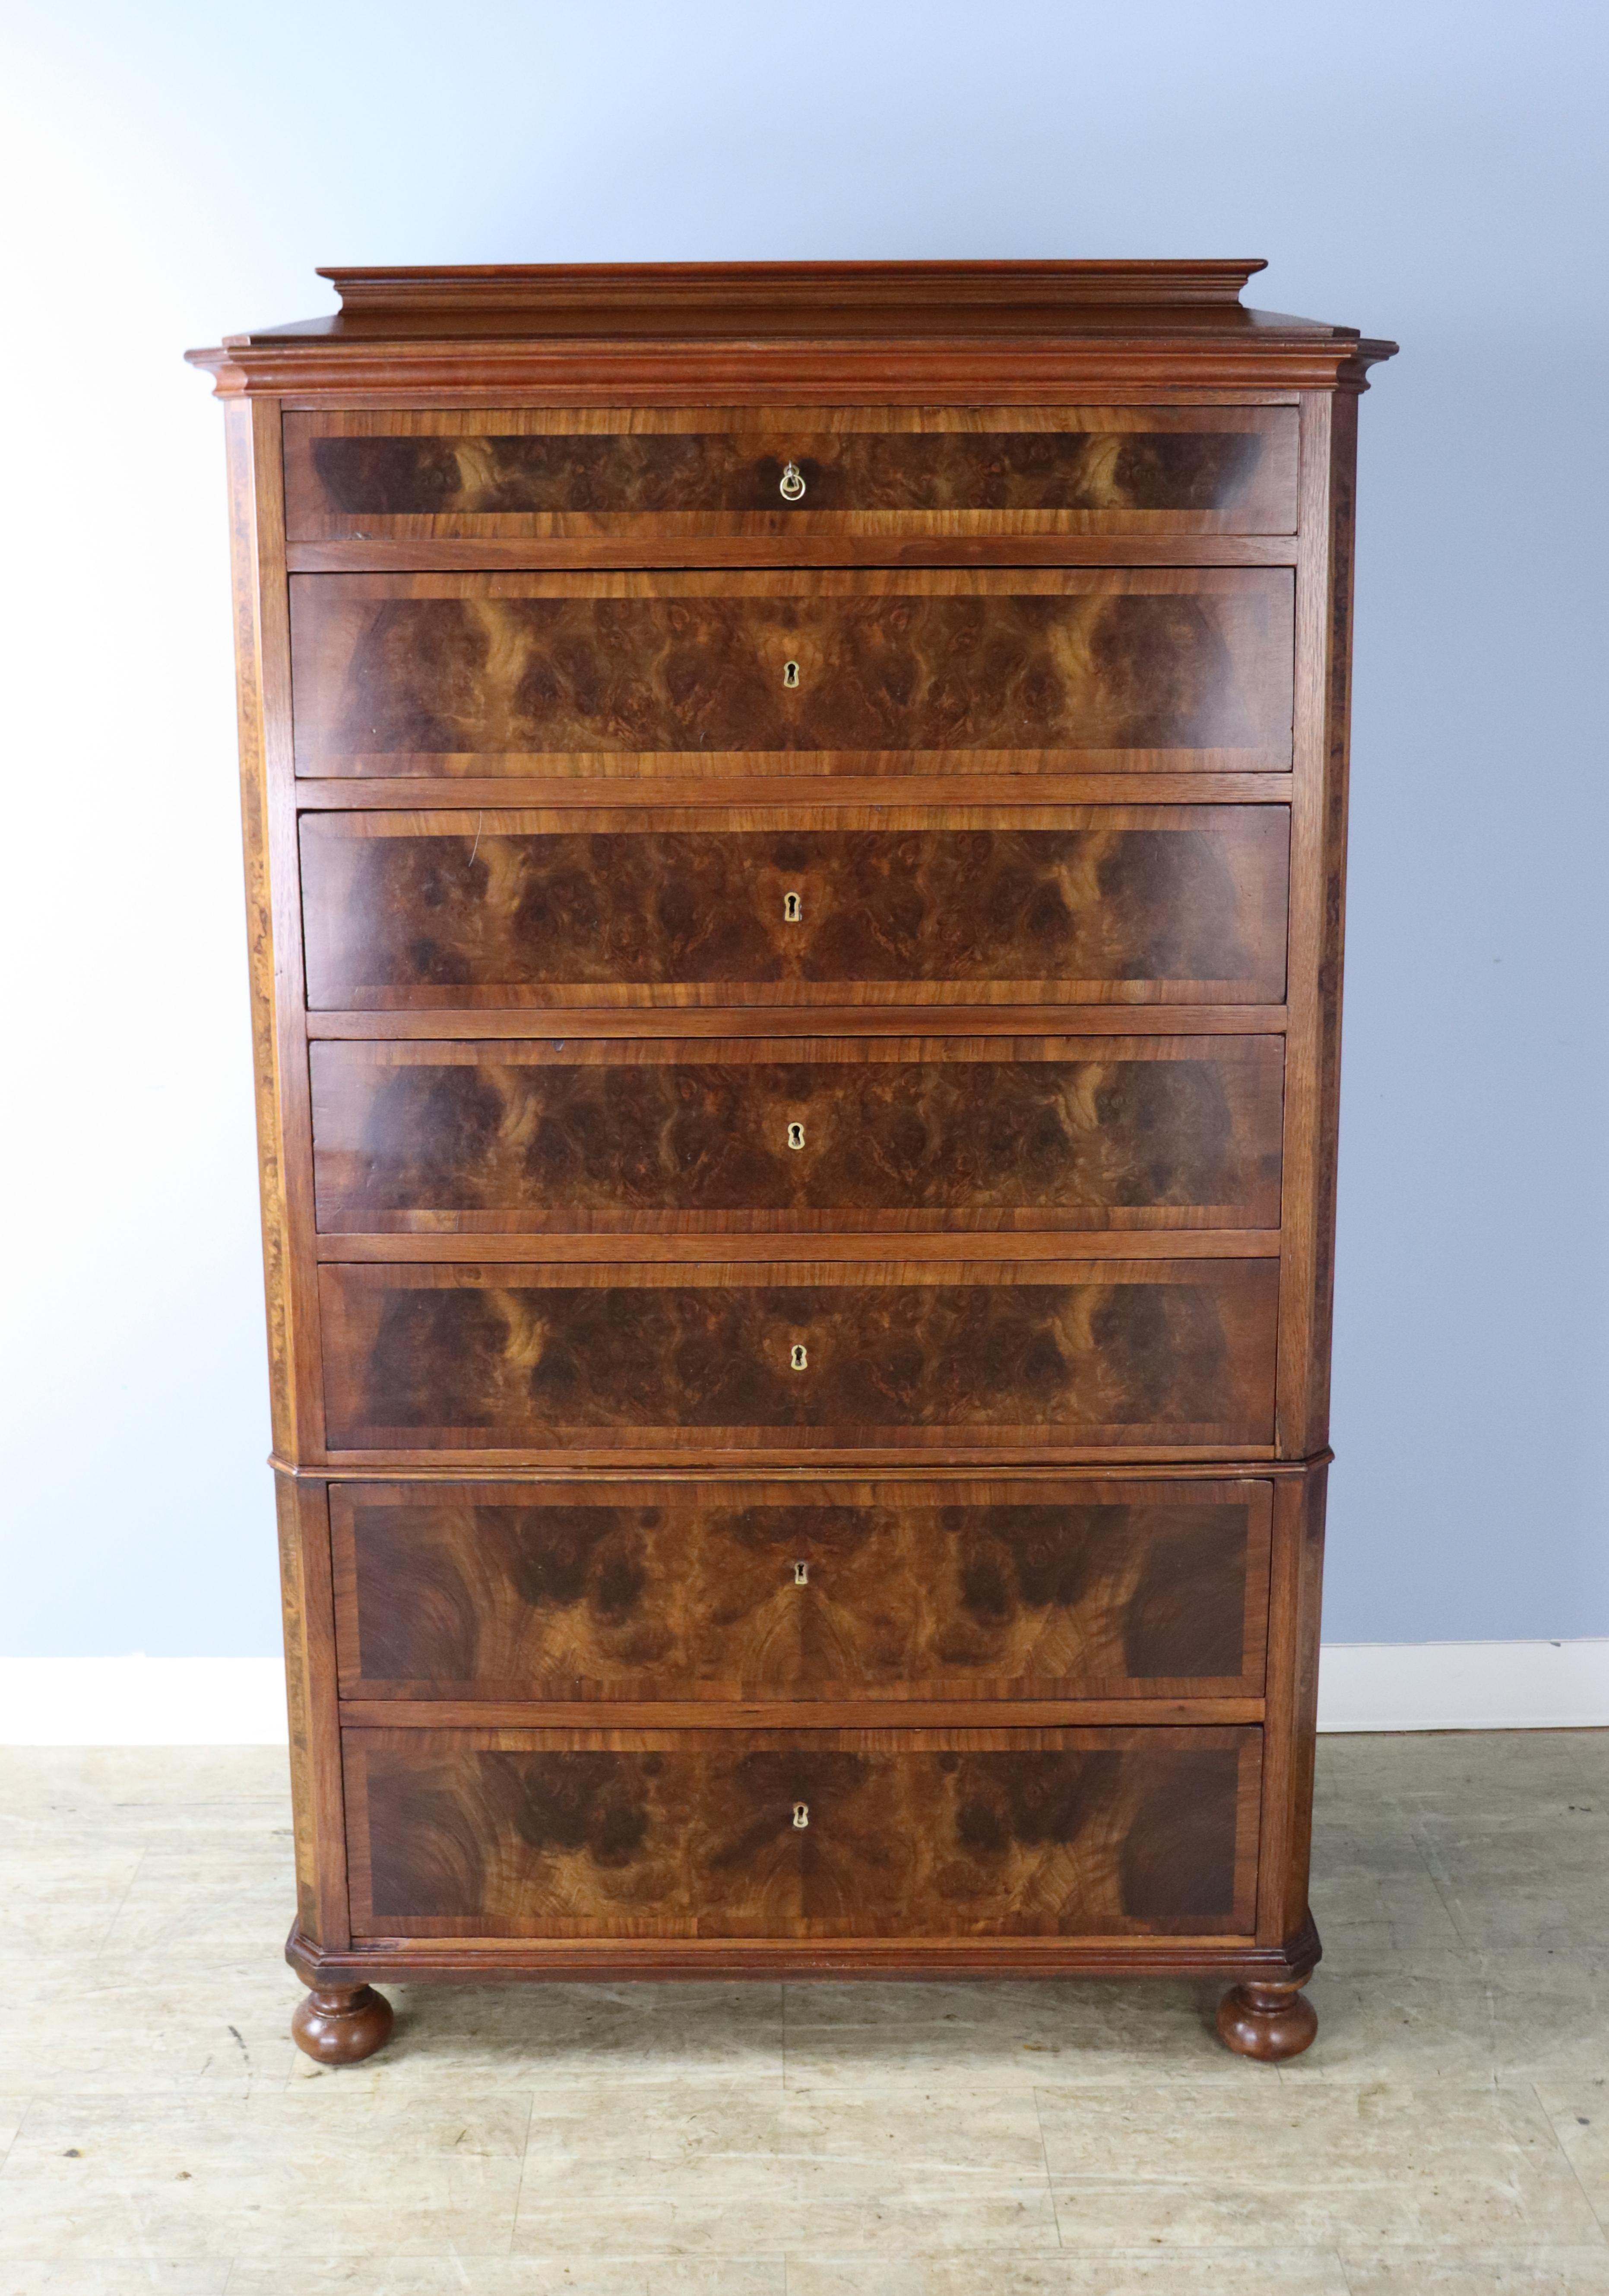 Like all semaniers, this chest has seven drawers, one for each day of the week. Built of glorious walnut with solid walnut burl accent panels. The stylized top can be removed for safe transport. Drawers open a single key, and run smoothly. Beautiful